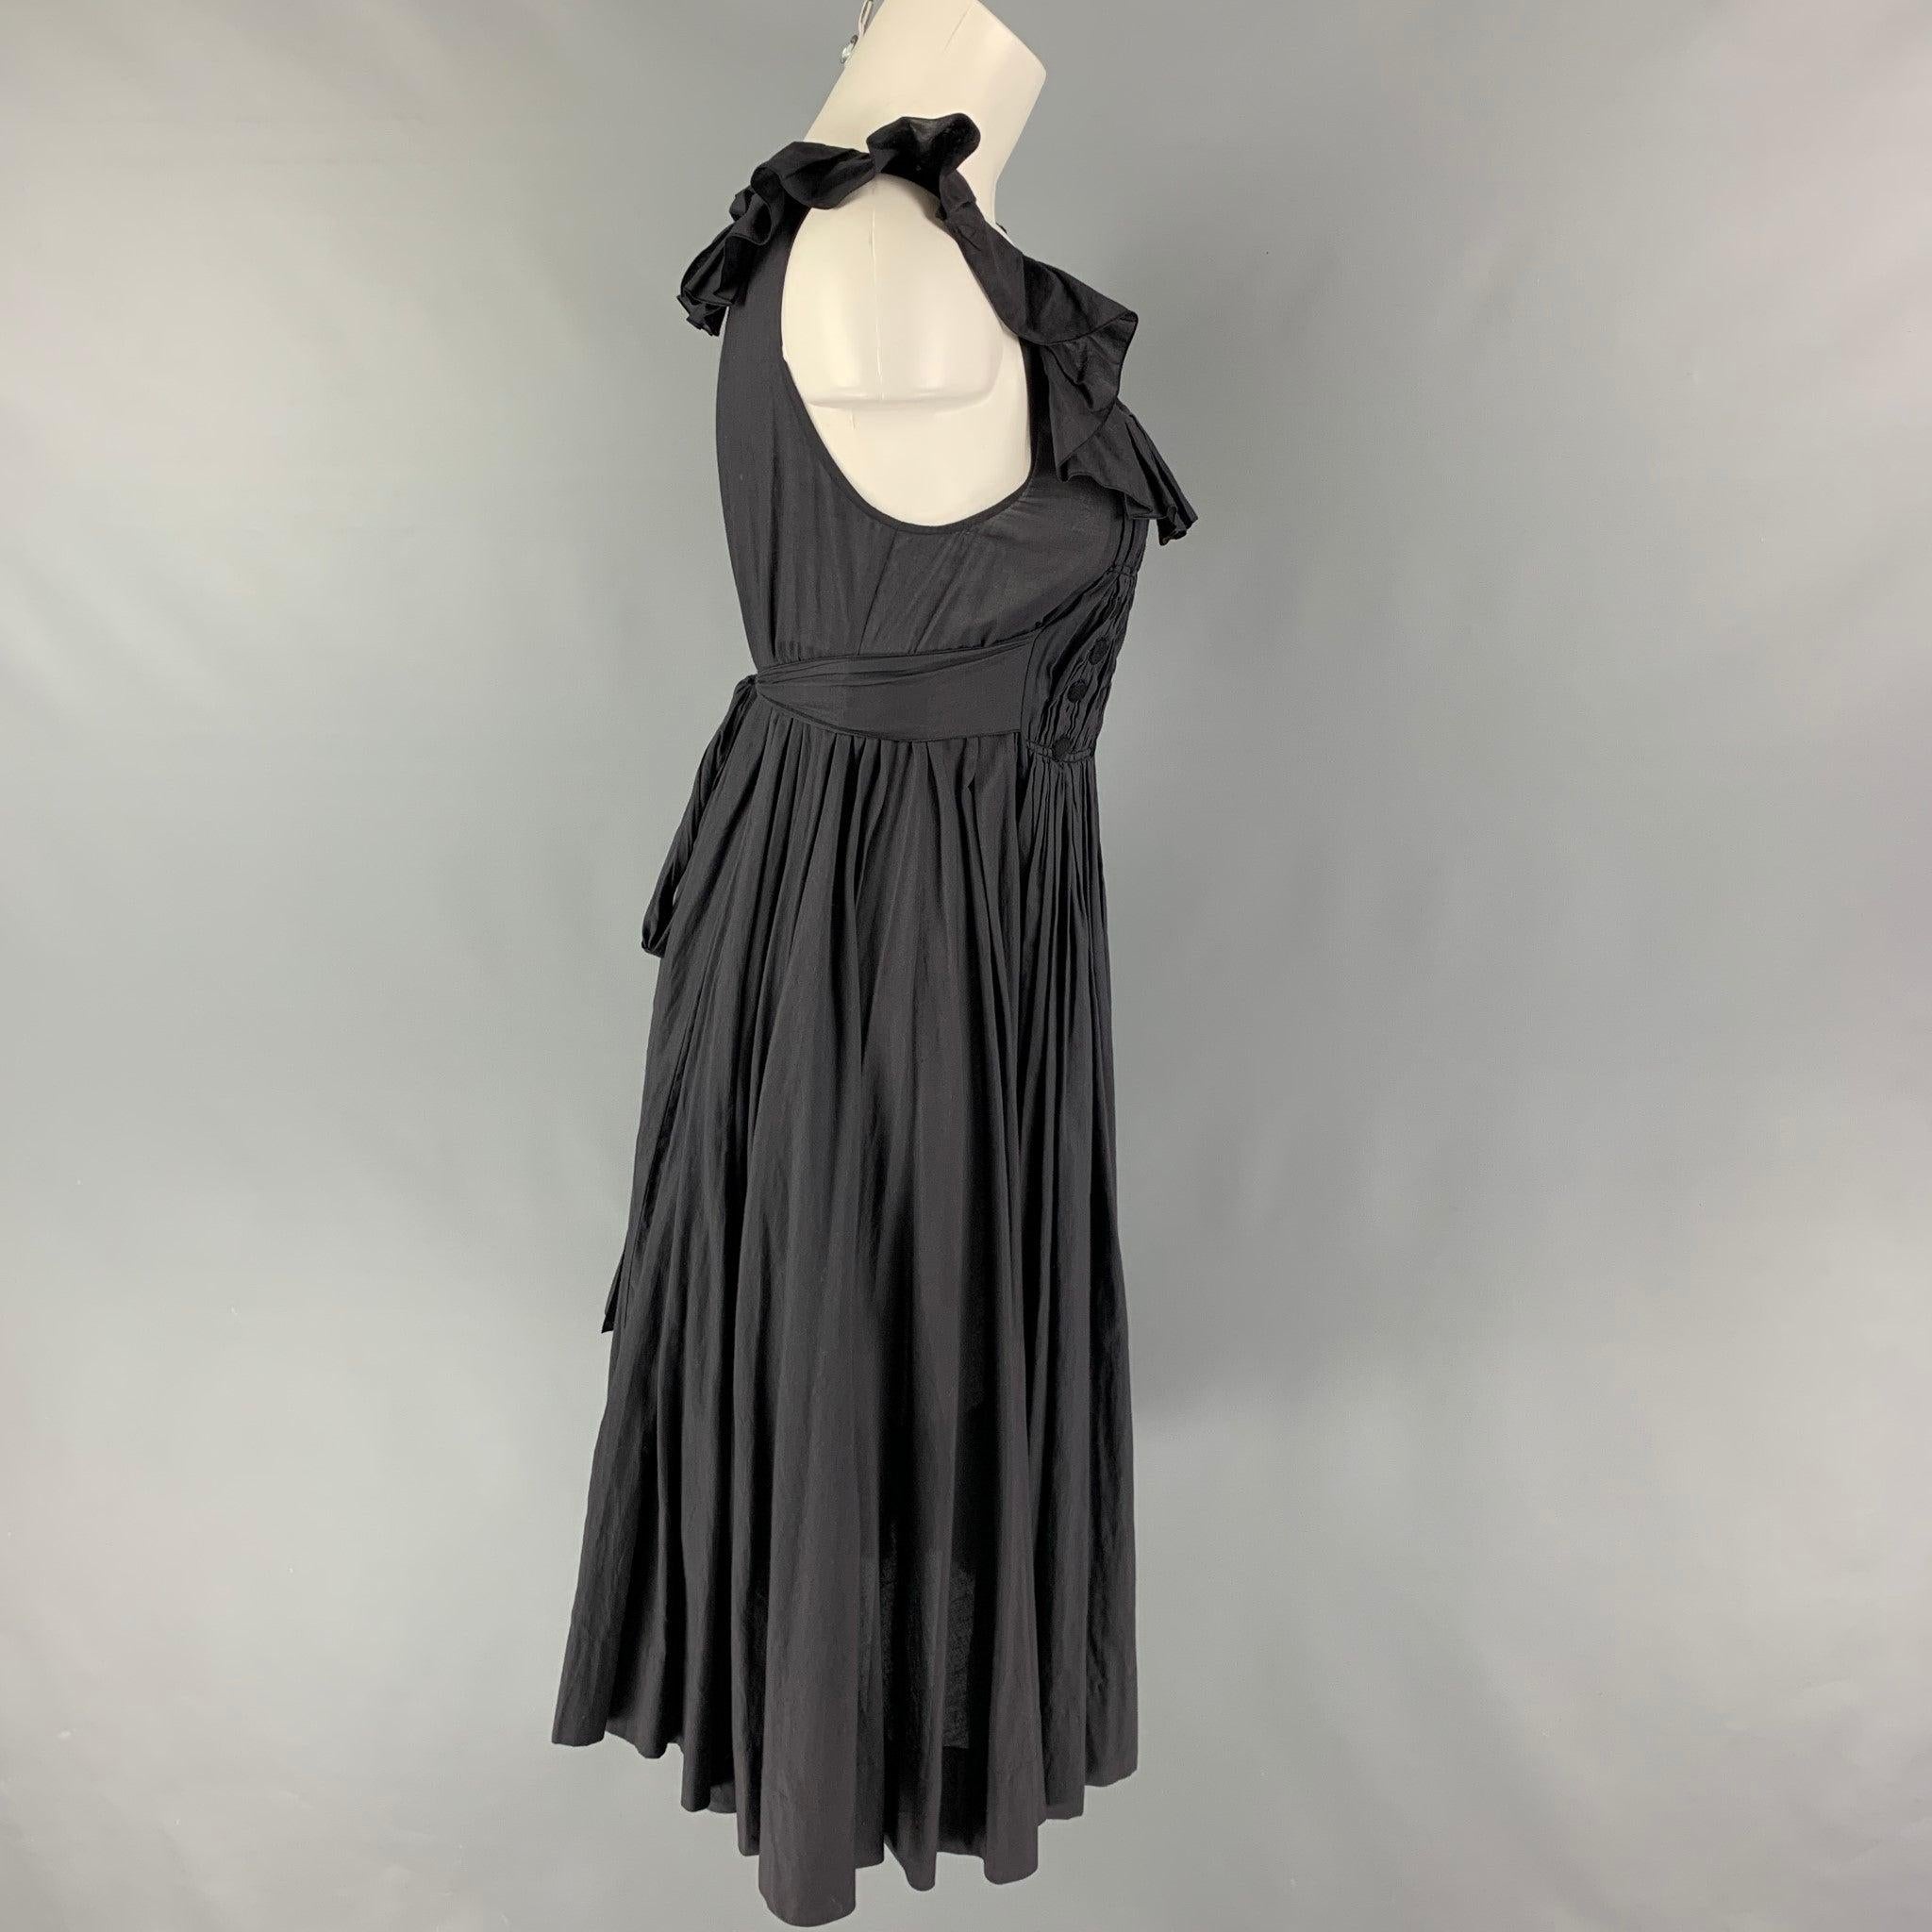 SONIA RYKIEL dress comes in a slate cotton featuring a pleated style, black applique details, and a waist belt detail.
Very Good
Pre-Owned Condition. 

Marked:   T 40 

Measurements: 
 
Shoulder: 12.5 inches  Bust: 34 inches  Waist: 34 inches  Hip: